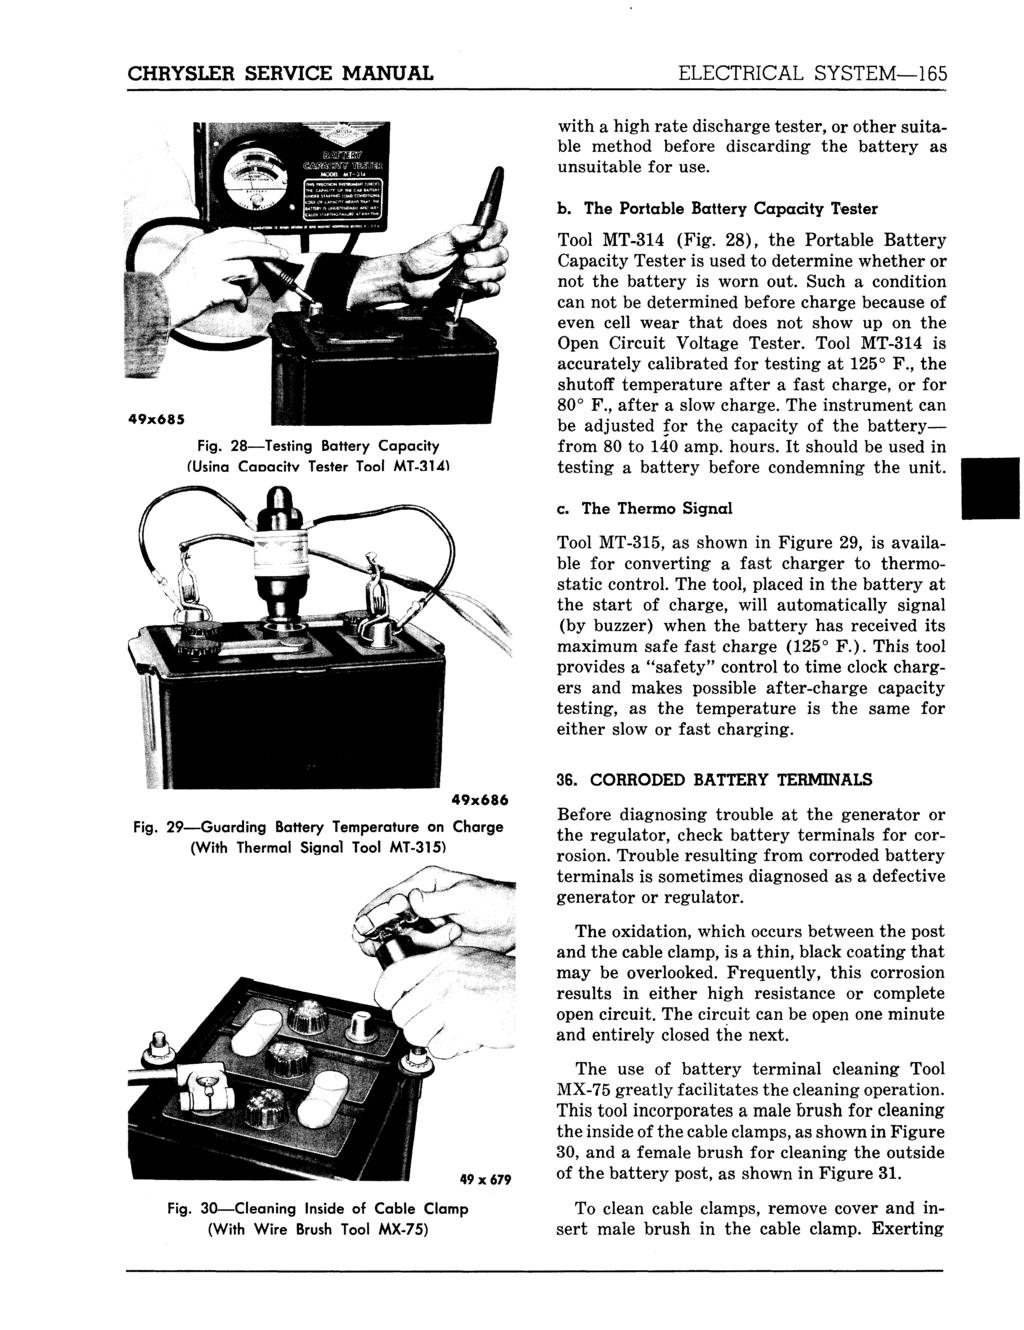 CHRYSLER SERVICE MANUAL ELECTRICAL SYSTEM 165 with a high rate discharge tester, or other suitable method before discarding the battery as unsuitable for use. 49x685 Fig.